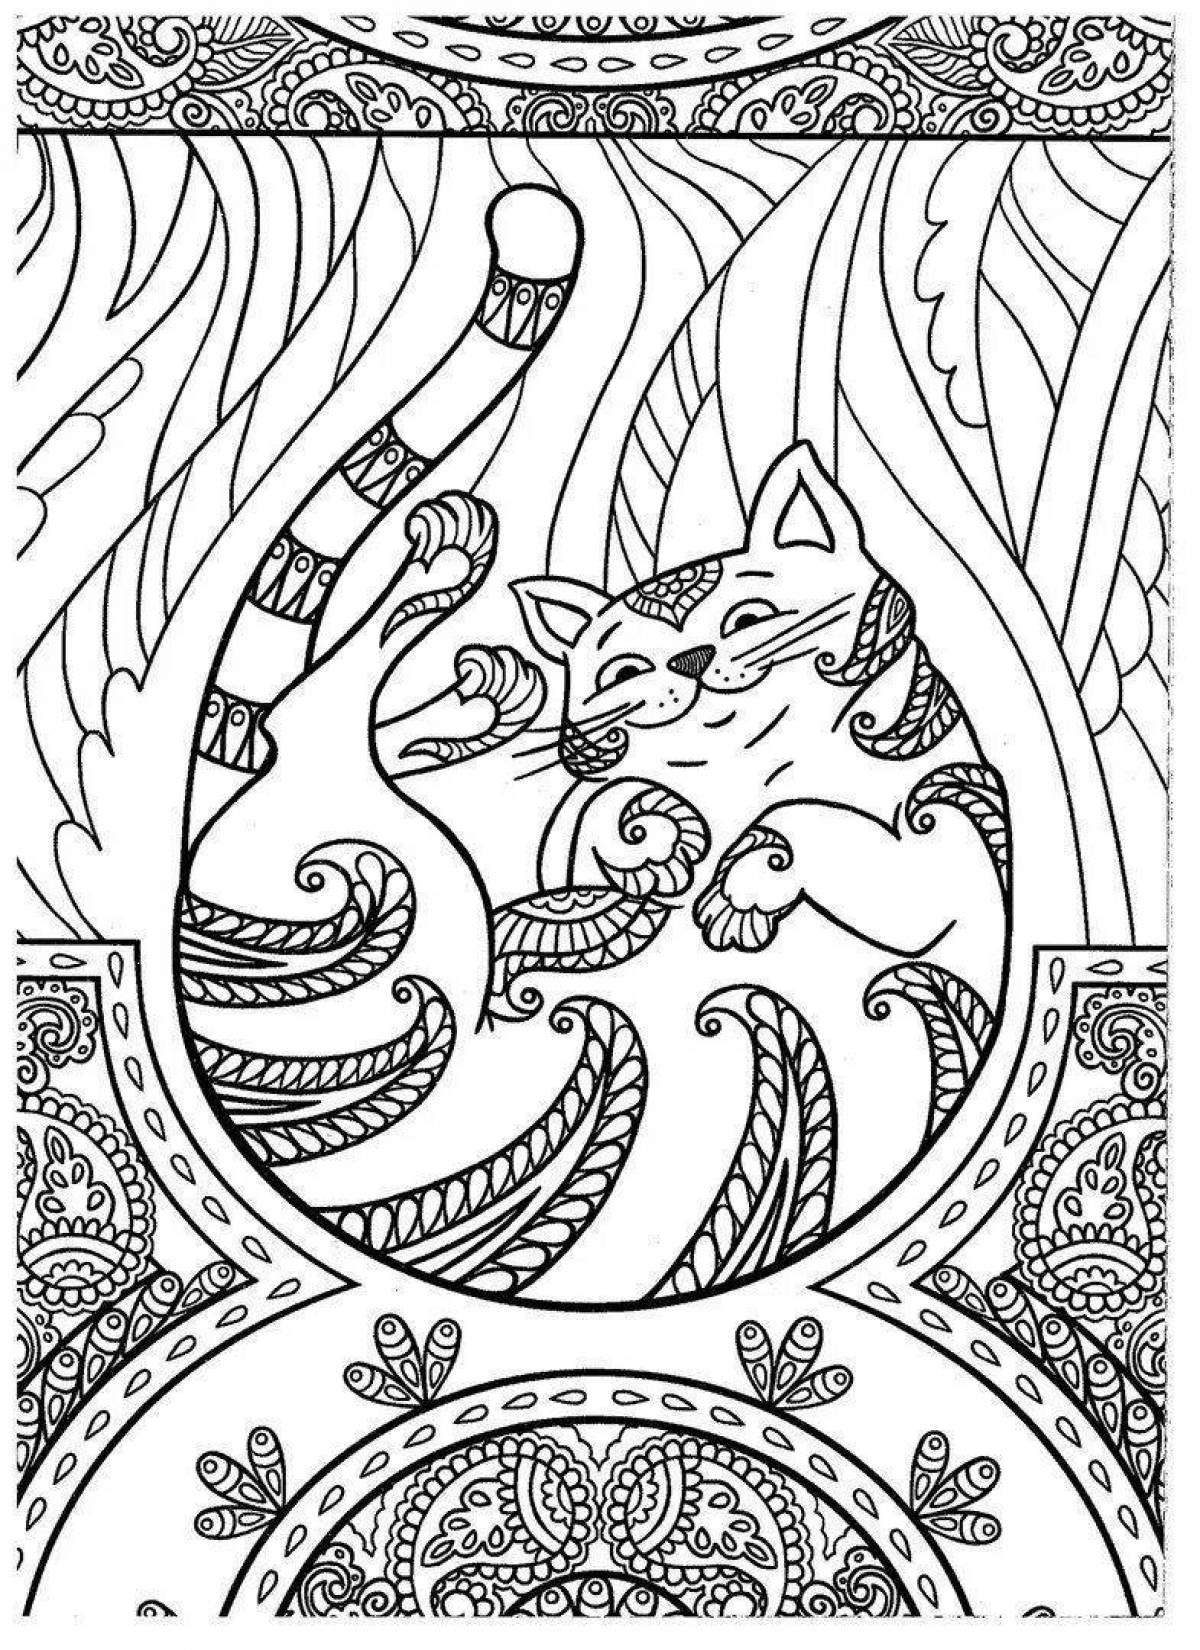 Colorful cat coloring page art